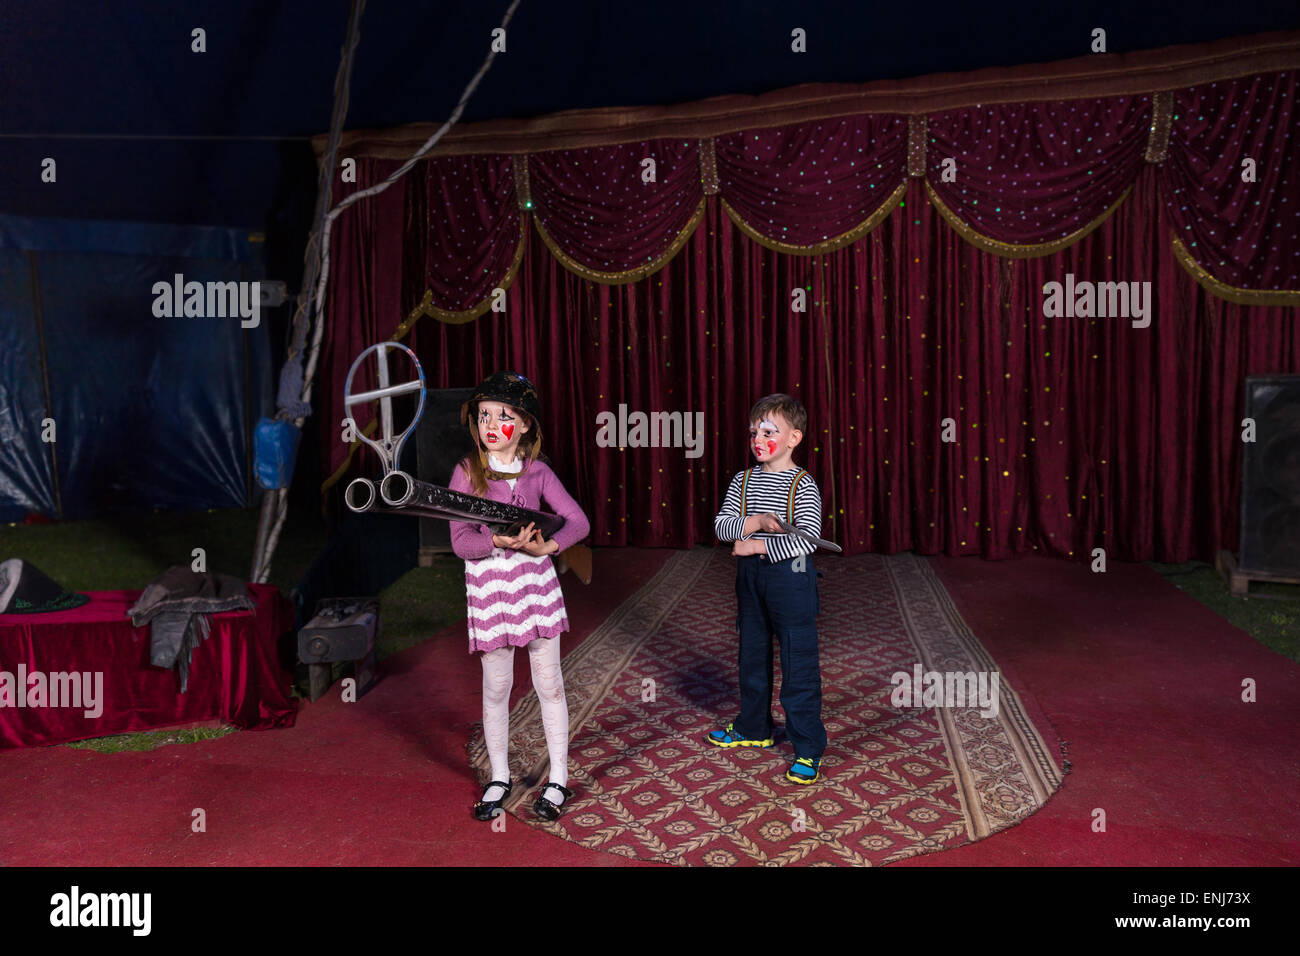 Boy and Girl Dressed as Clowns Standing on Stage Holding Large Double Barreled Shot Gun Stock Photo